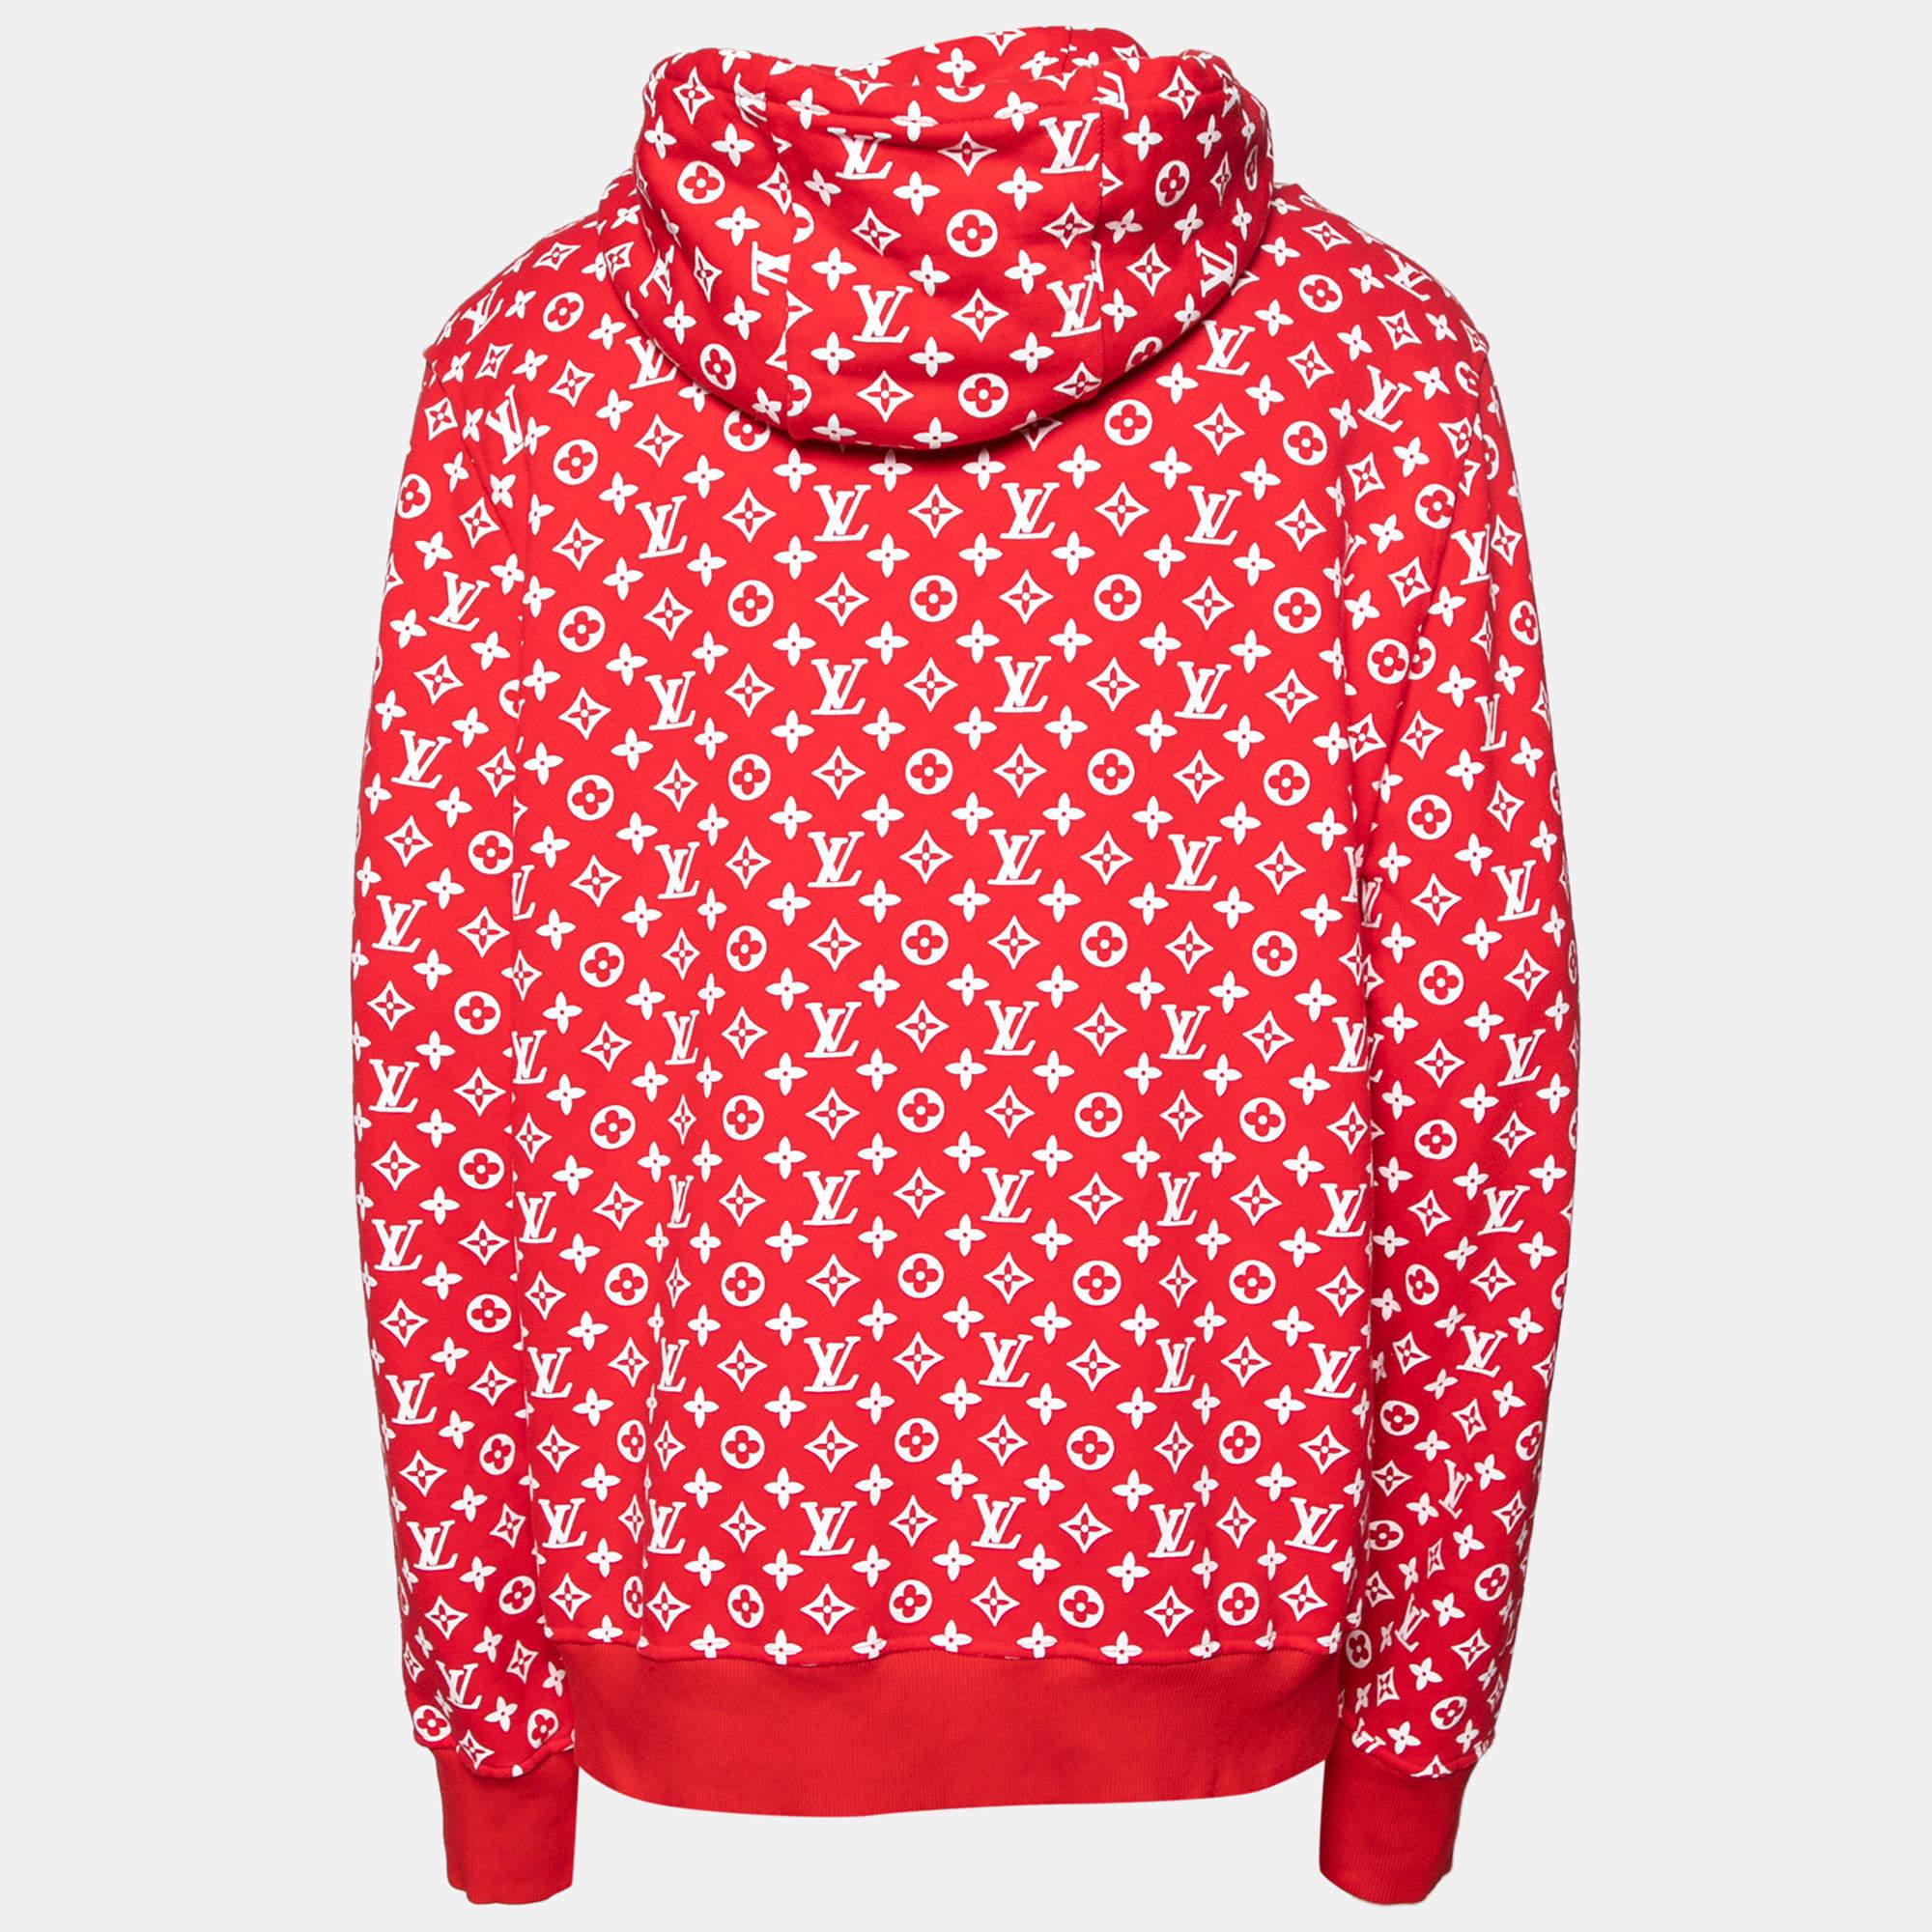 The Louis Vuitton x Supreme collaboration was first introduced in 2017, and its designs immediately started ruling the wishlist of every fashionista. Made from the signature monogram and a mix of quality fabrics, this hoodie represents the best of